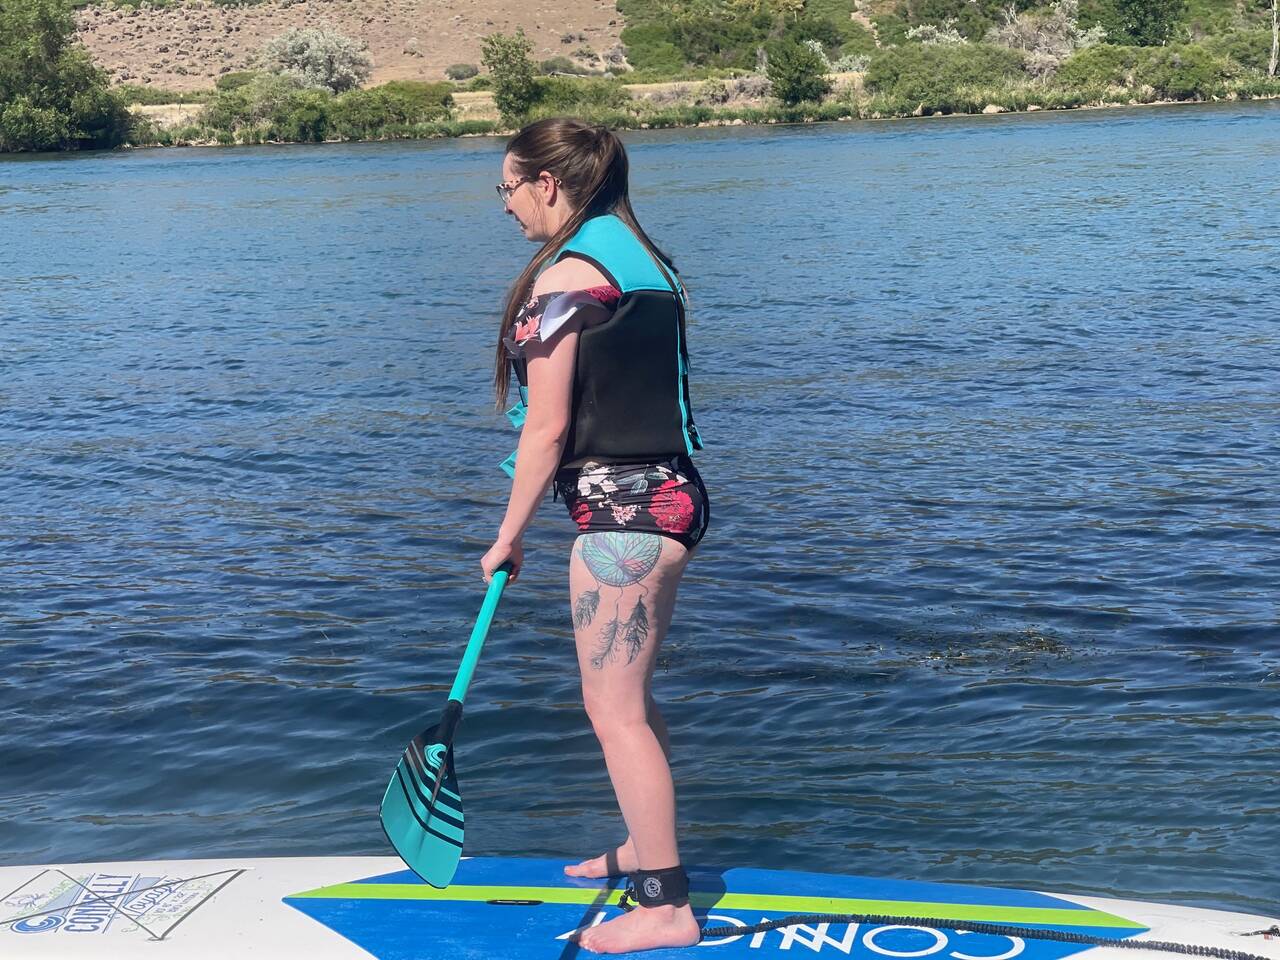 SUP (Stand up paddle board)